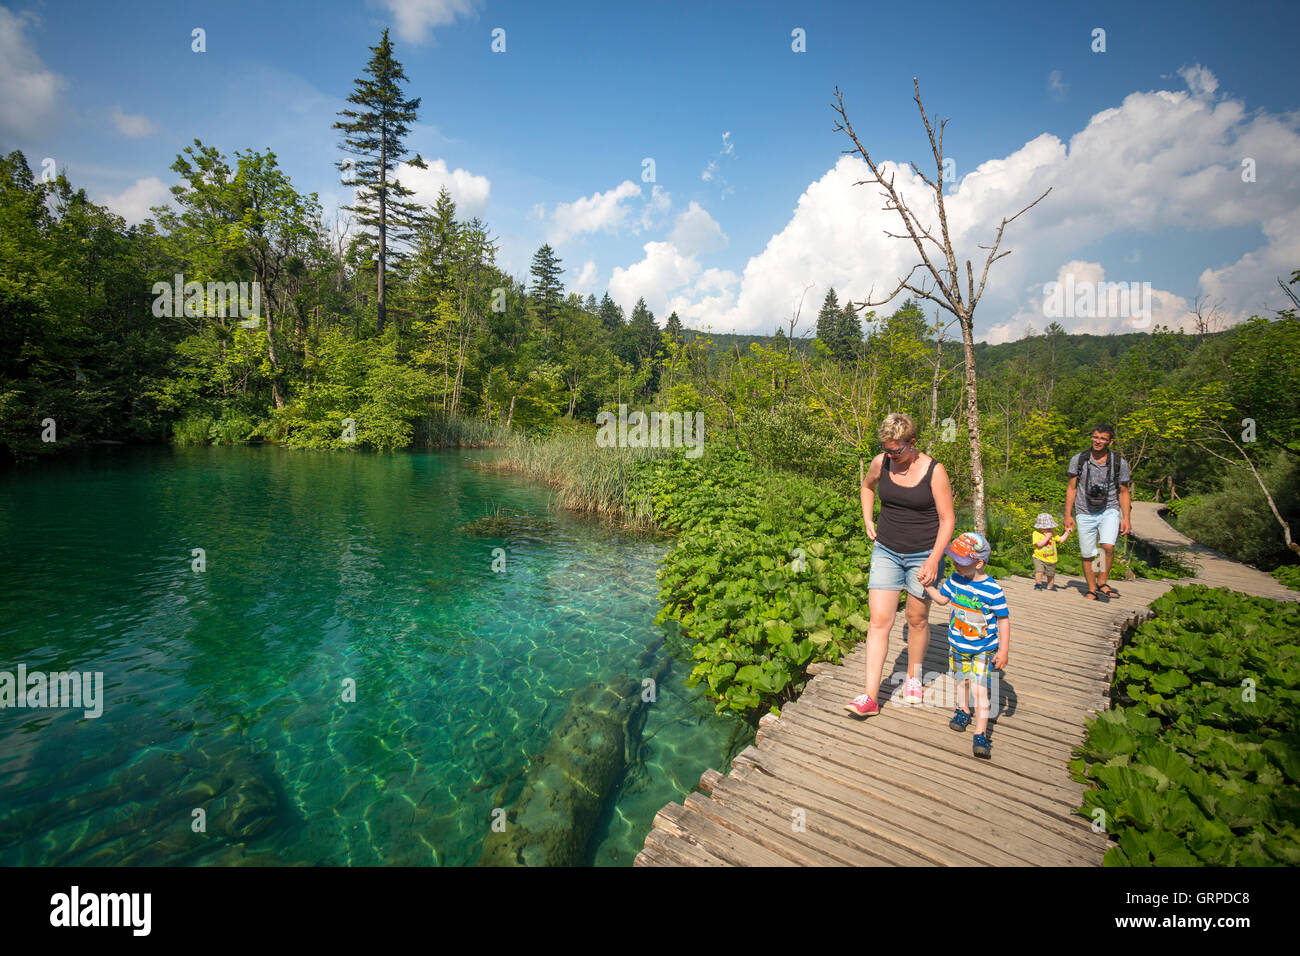 Holidaymakers strolling on a wooden pontoon lined by butterburs along the Korana river (Plitvice Lakes National Park - Croatia). Stock Photo